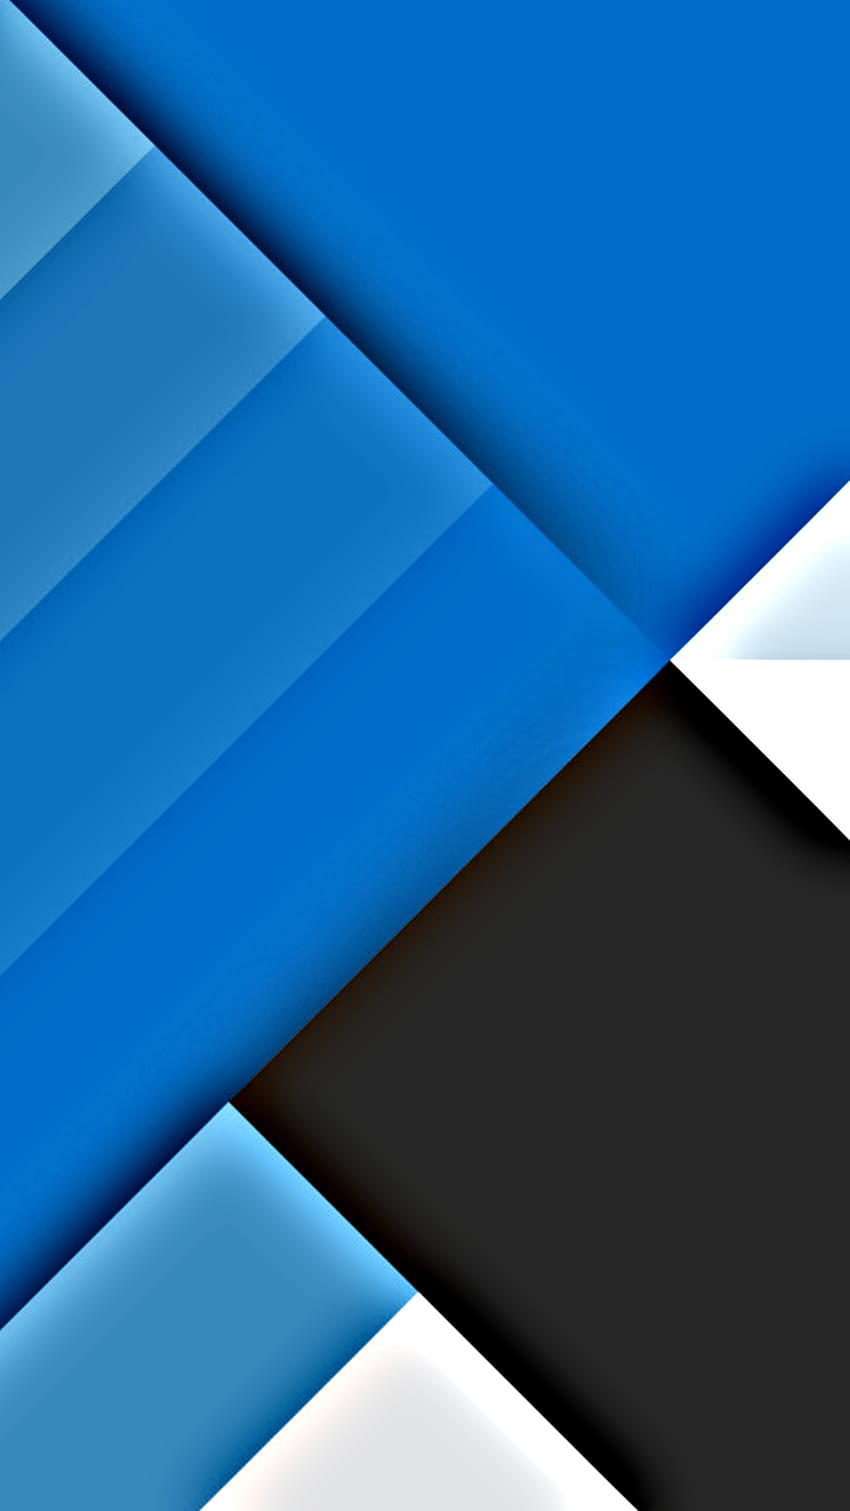 material design blue, samsung, modern, shapes, texture, cool, pattern, abstract, galaxy, lines, colorful HD phone wallpaper